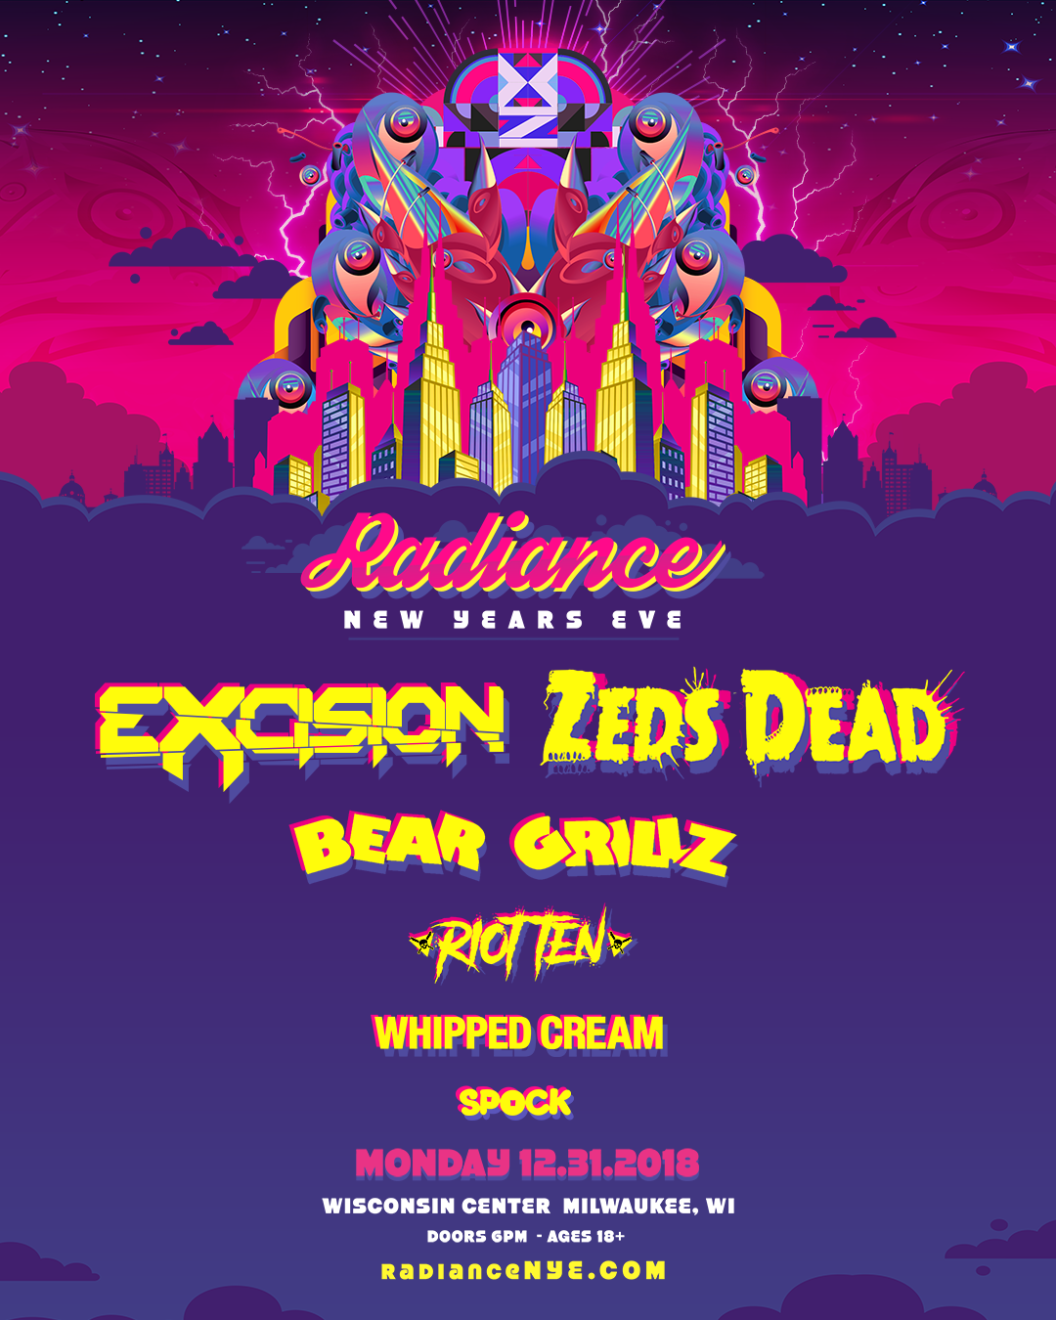 Festival Radiance NYE Milwaukee, Wis. tickets and lineup on Dec 31